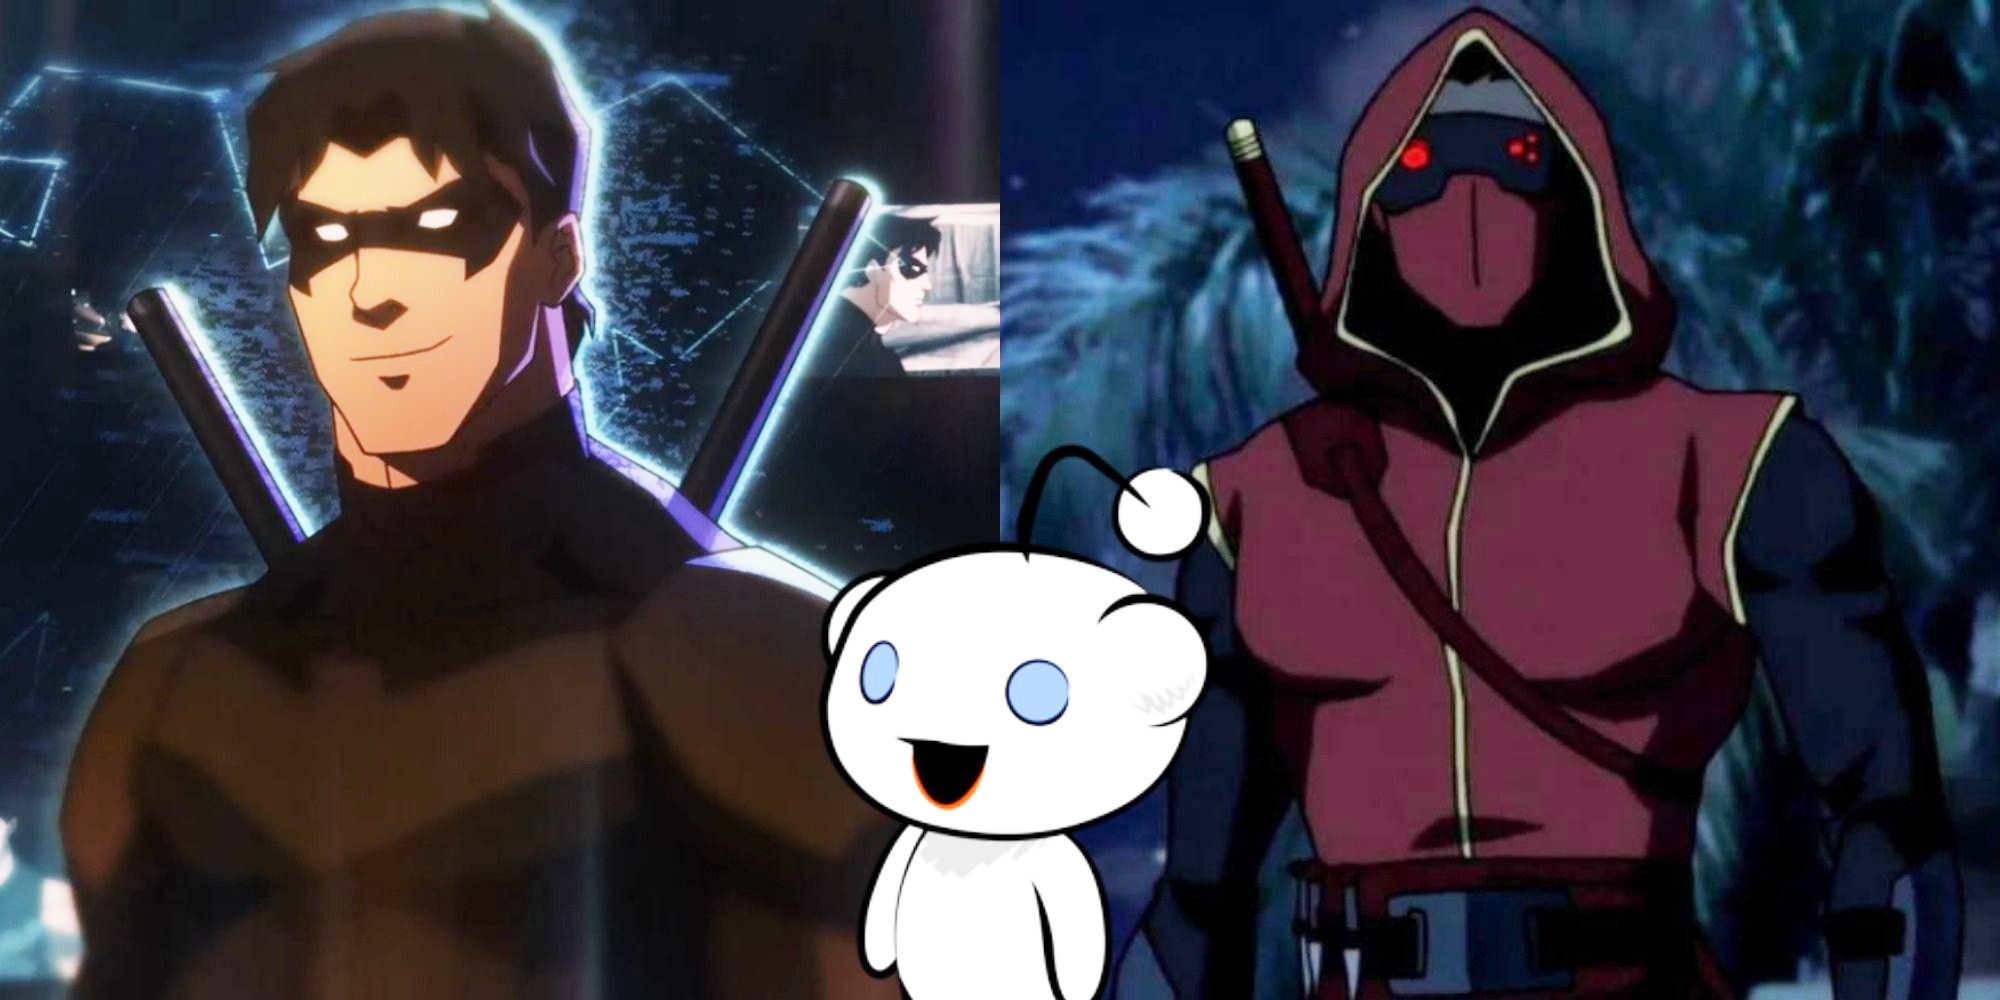 Split image showing Nightwing and Jason Todd in Young Justice and Snoo from Reddit